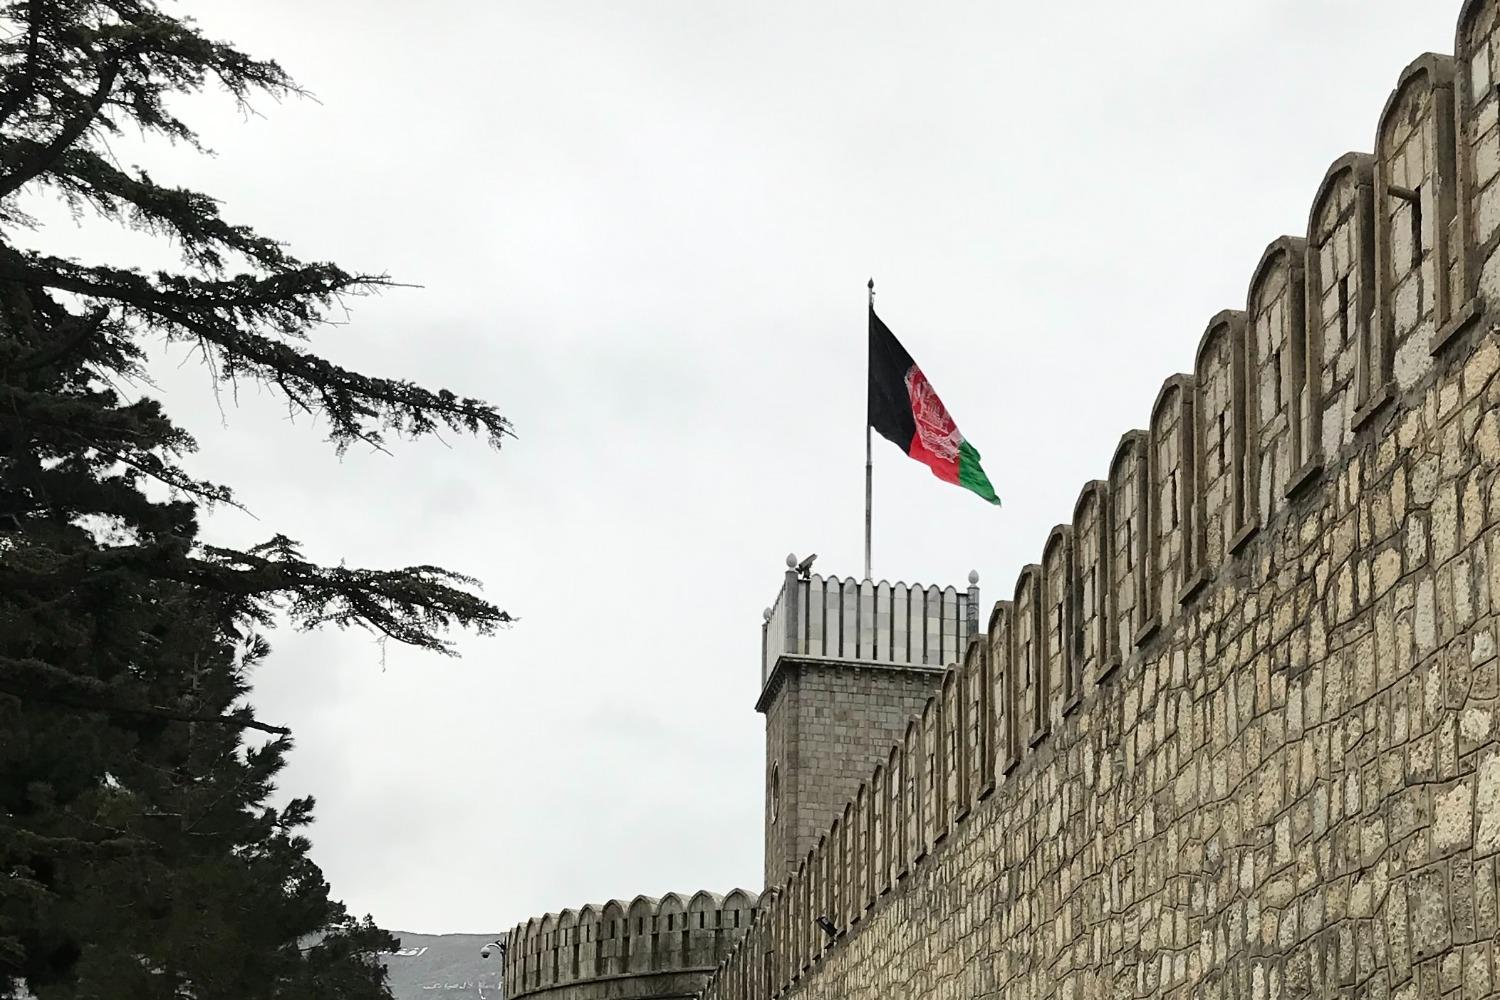 Afghan flag flies over a fortress wall in Kabul